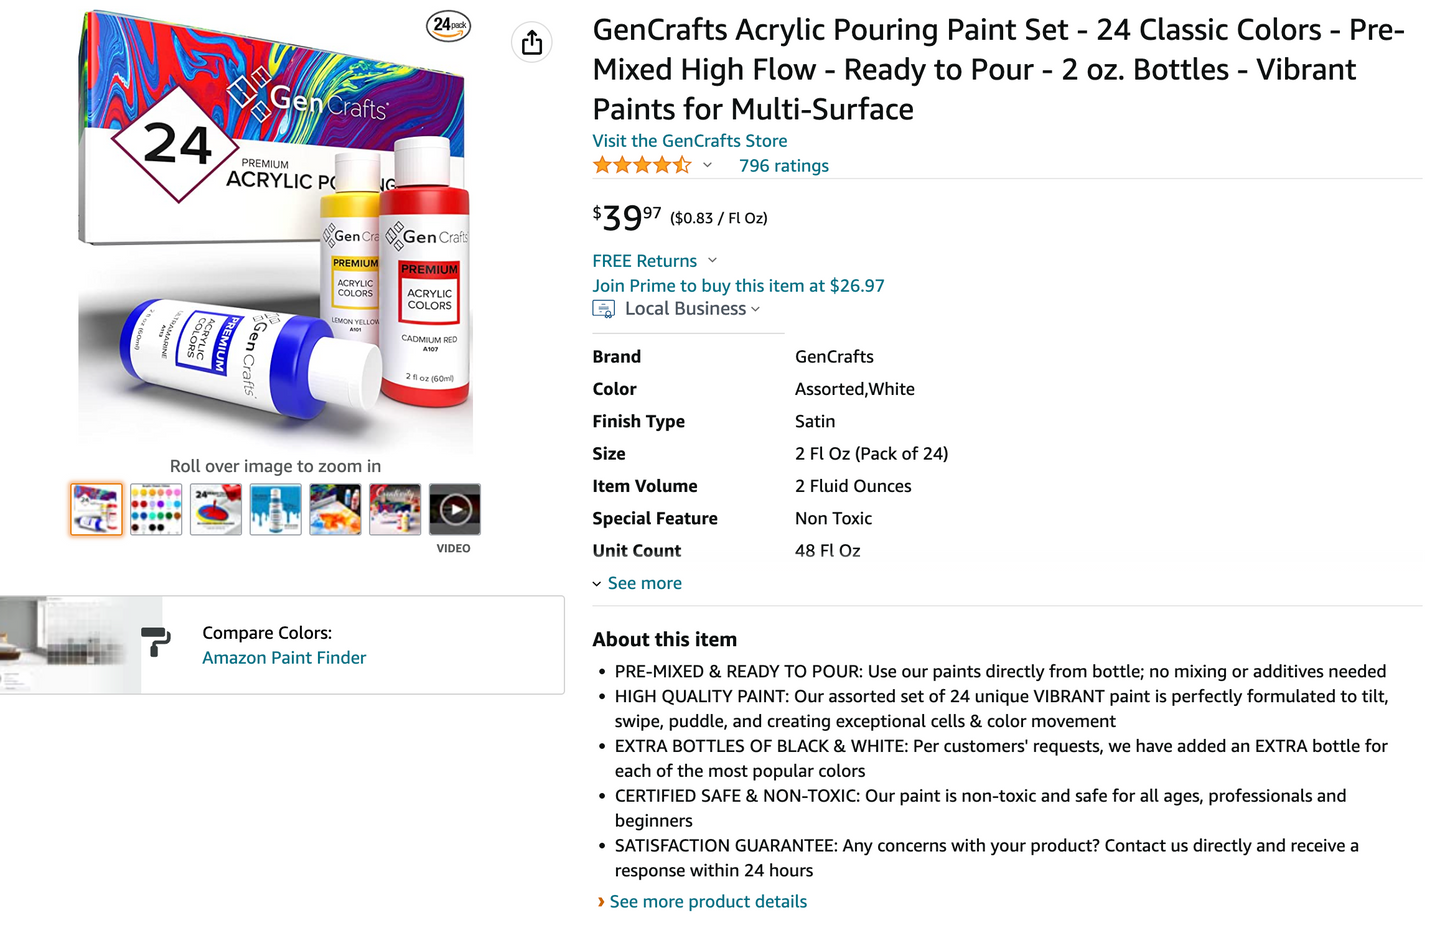 Acrylic Pouring Paint Set by GenCrafts - 24 Classic Colors - [SKU: CP24]